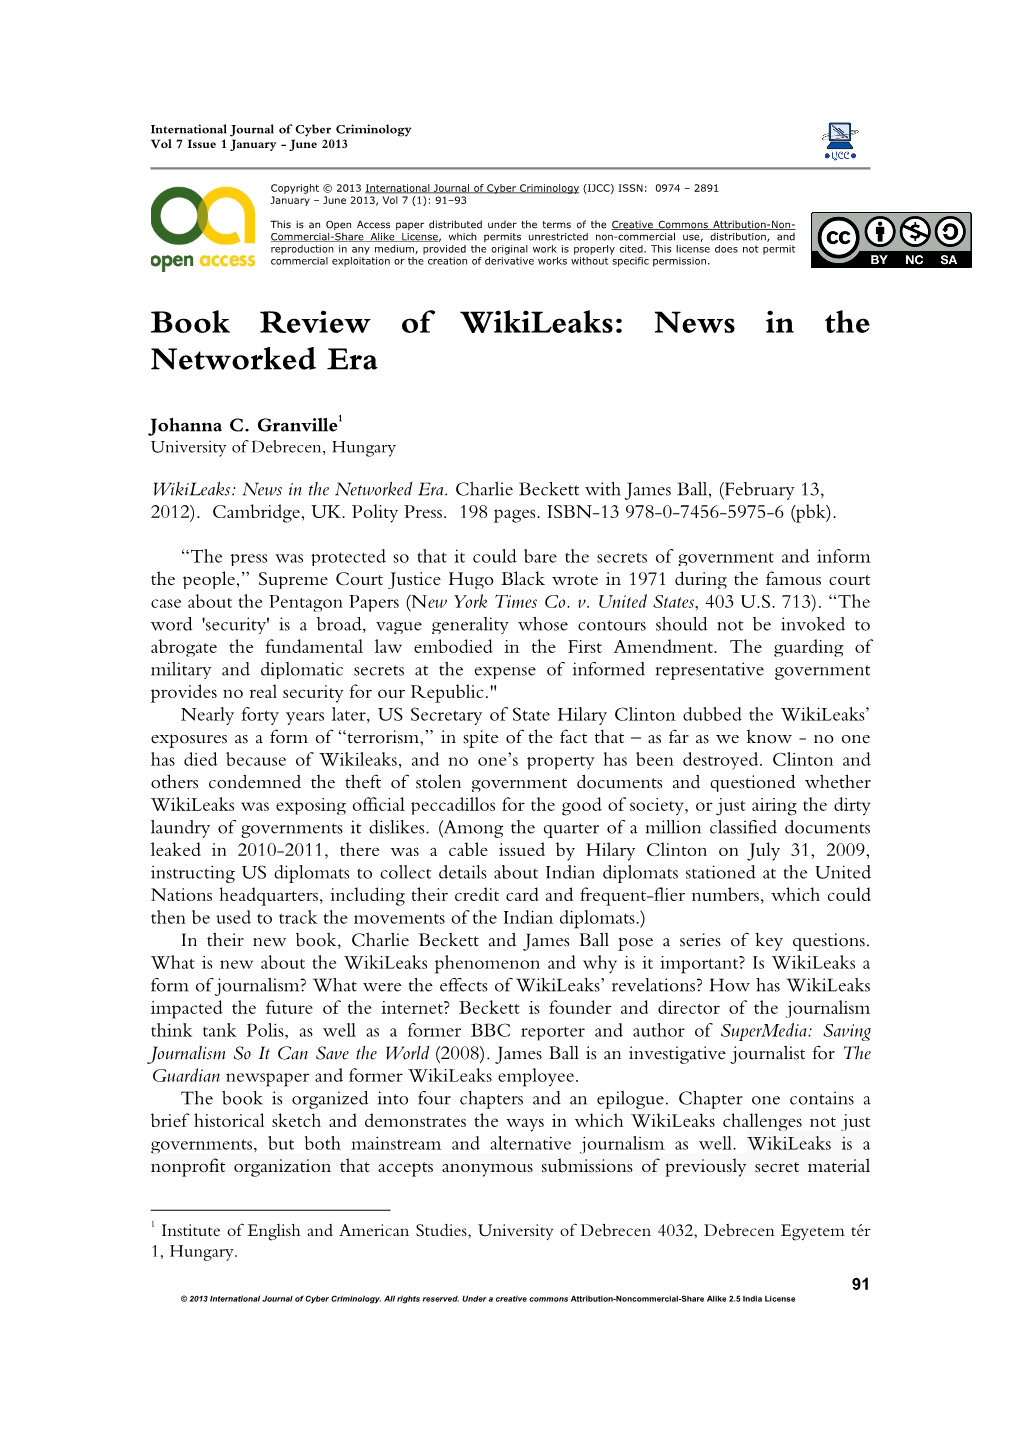 Book Review of Wikileaks: News in the Networked Era